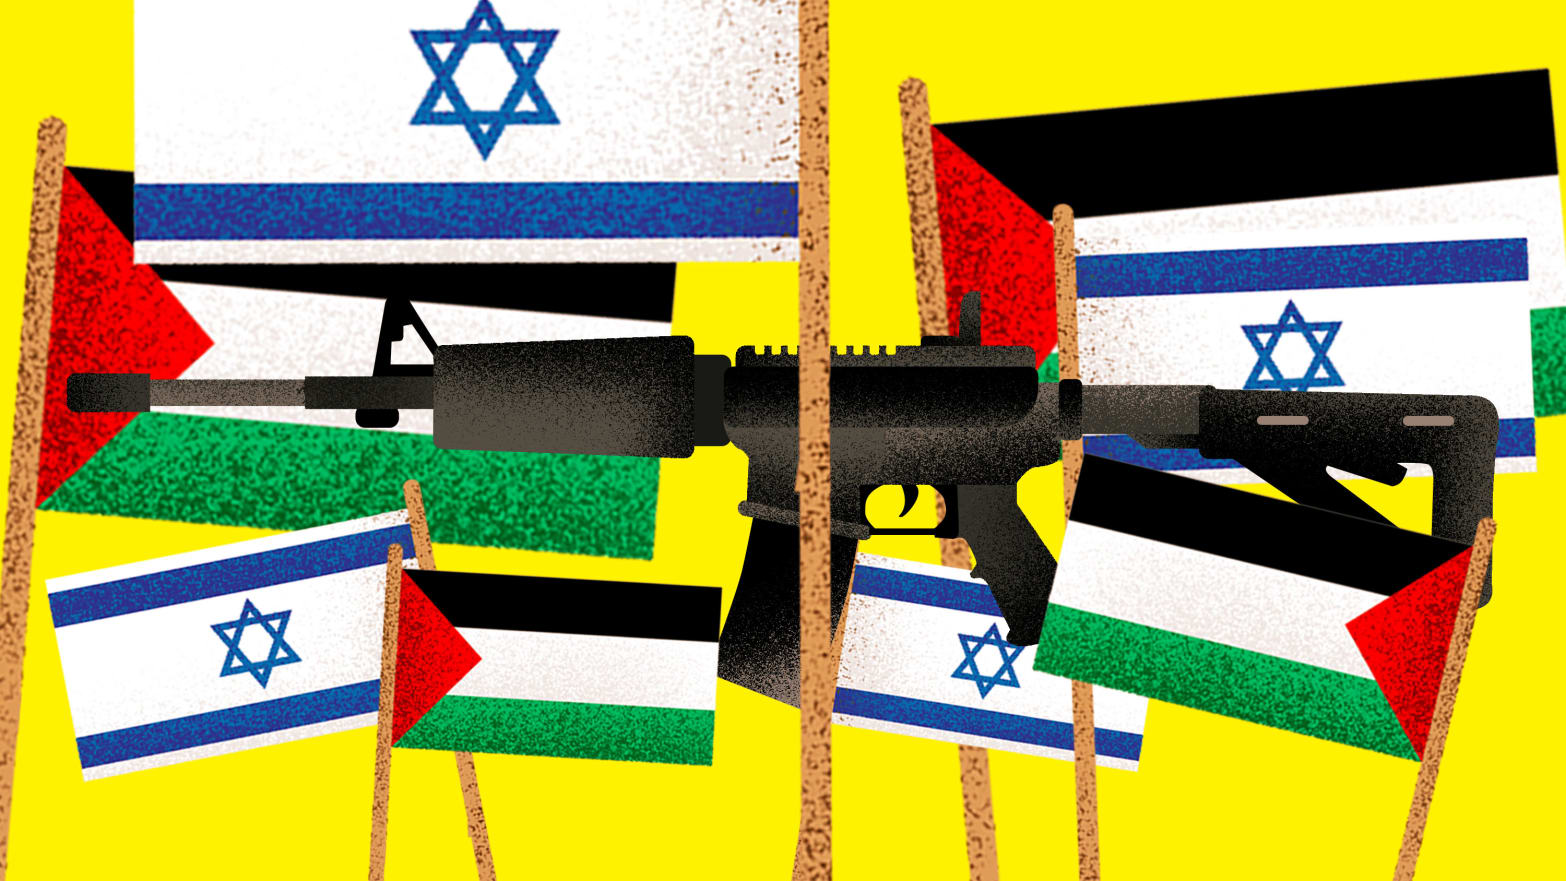 An illustration of a military rifle surrounded by Israeli and Palestinian flags